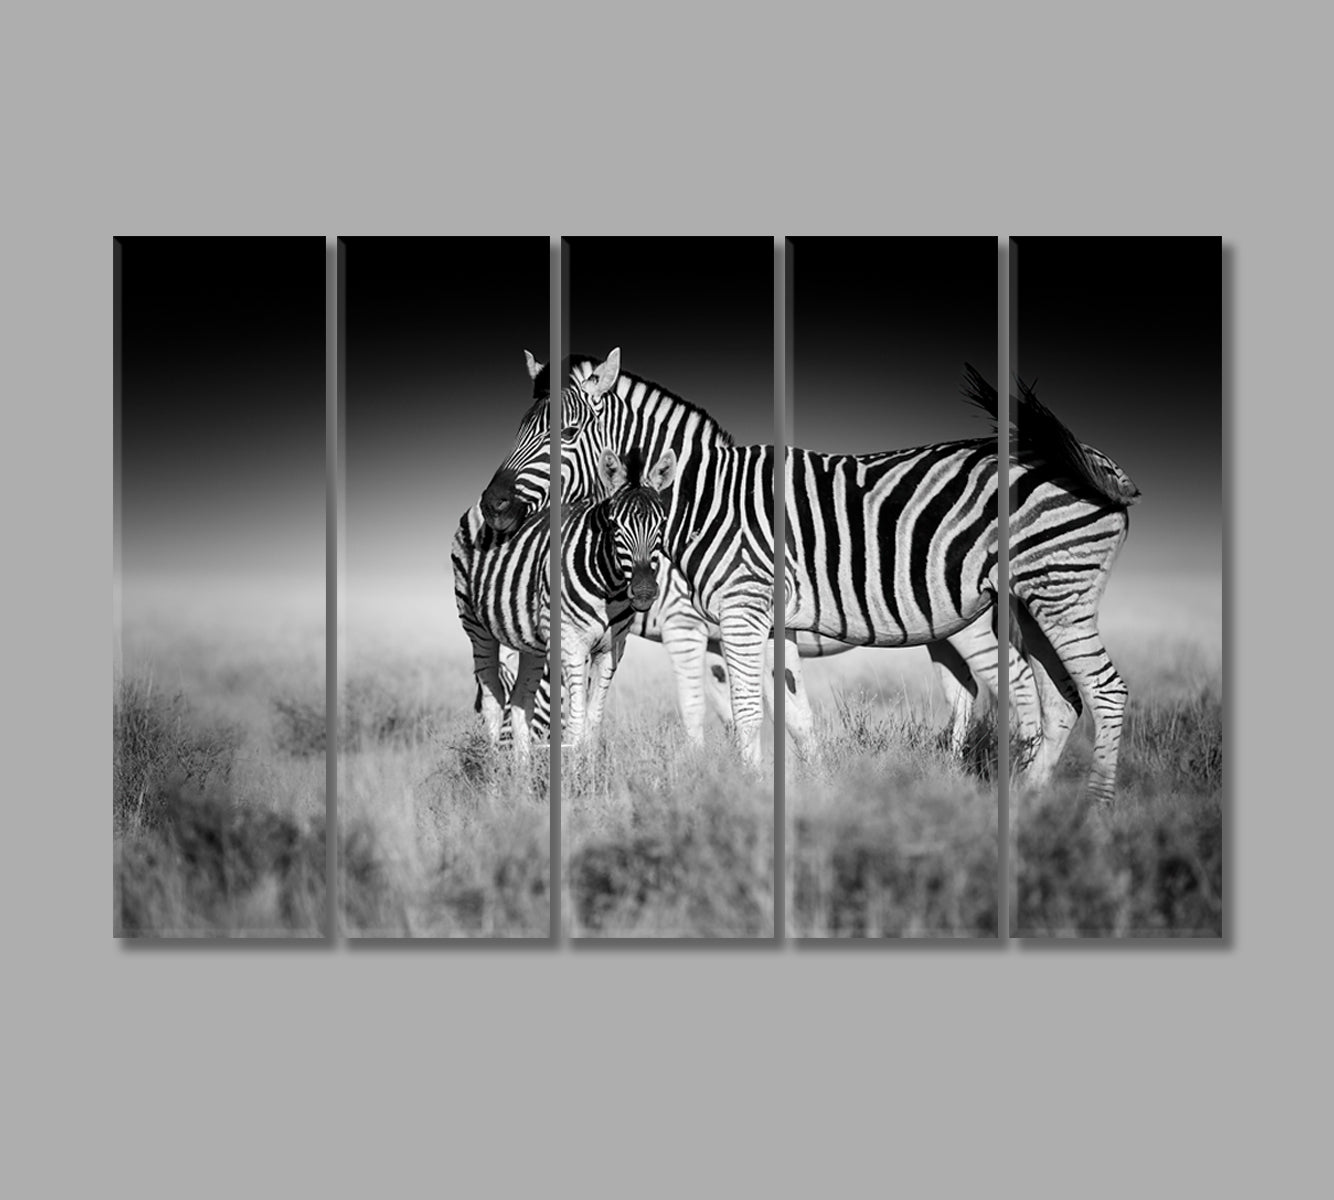 Zebra Mother and Foal in Black and White Canvas Print-Canvas Print-CetArt-5 Panels-36x24 inches-CetArt